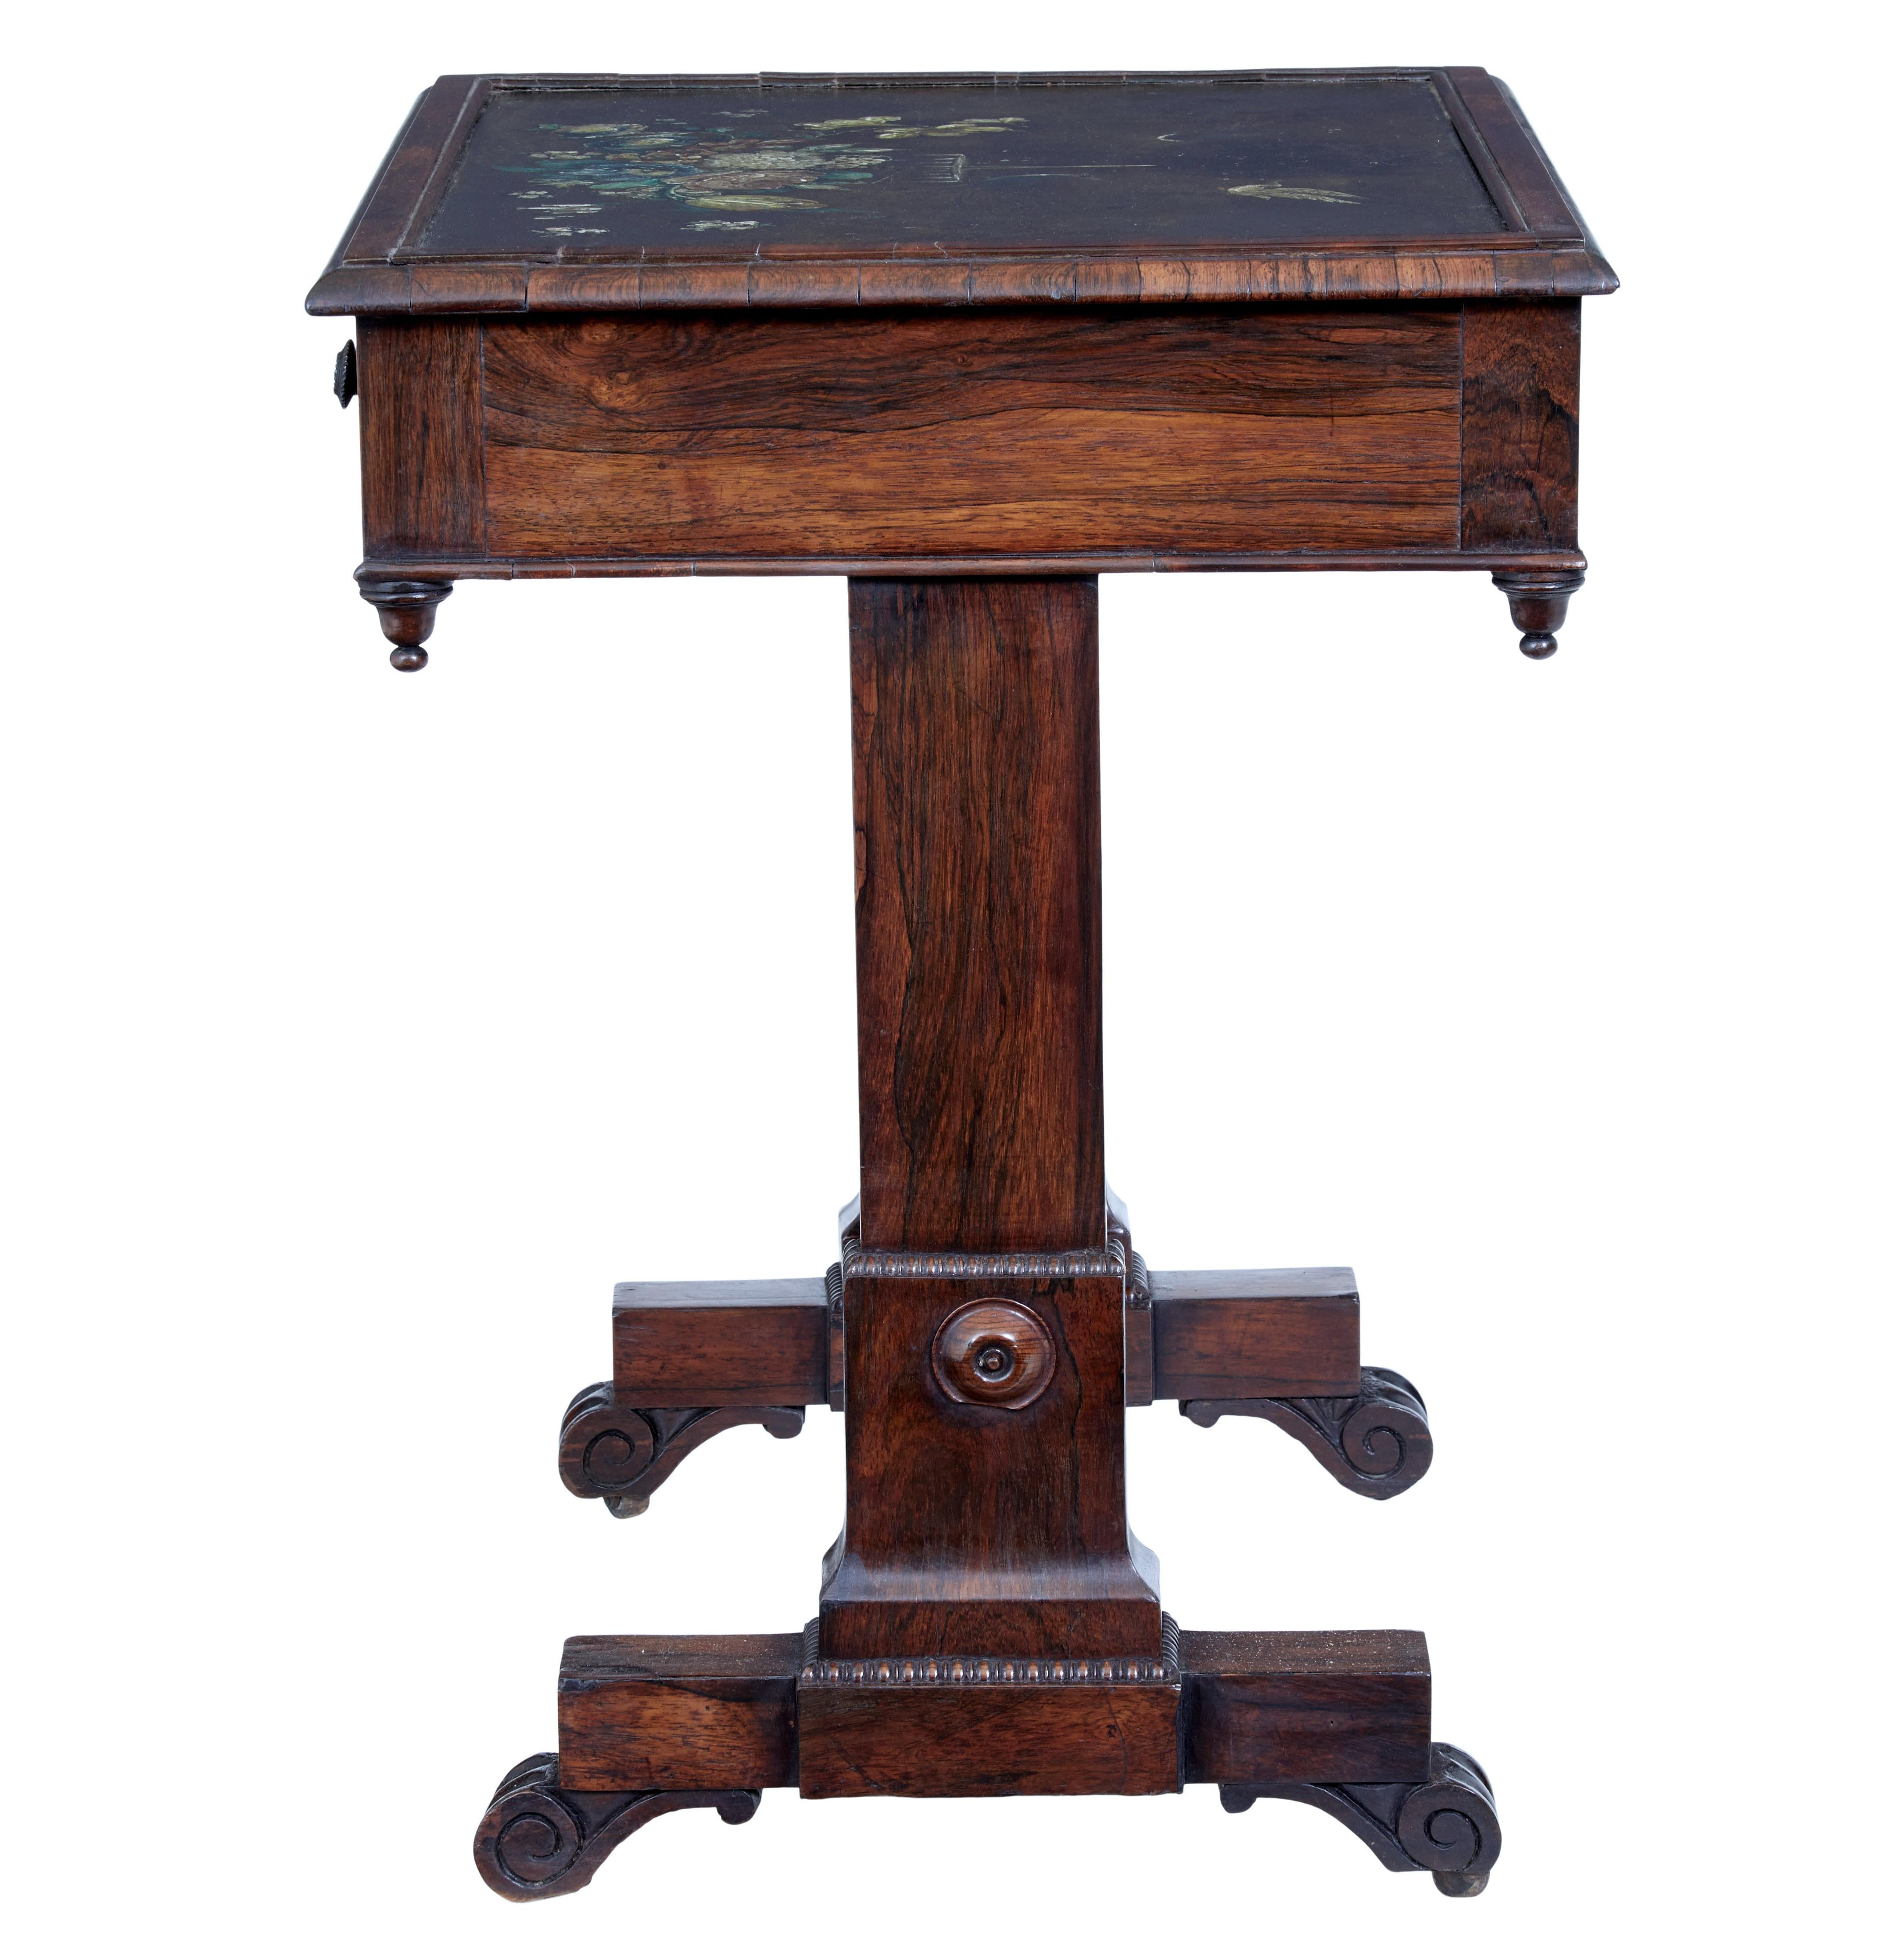 Hand-Carved Early 19th Century Regency Palisander Painted Slate Top Side Table